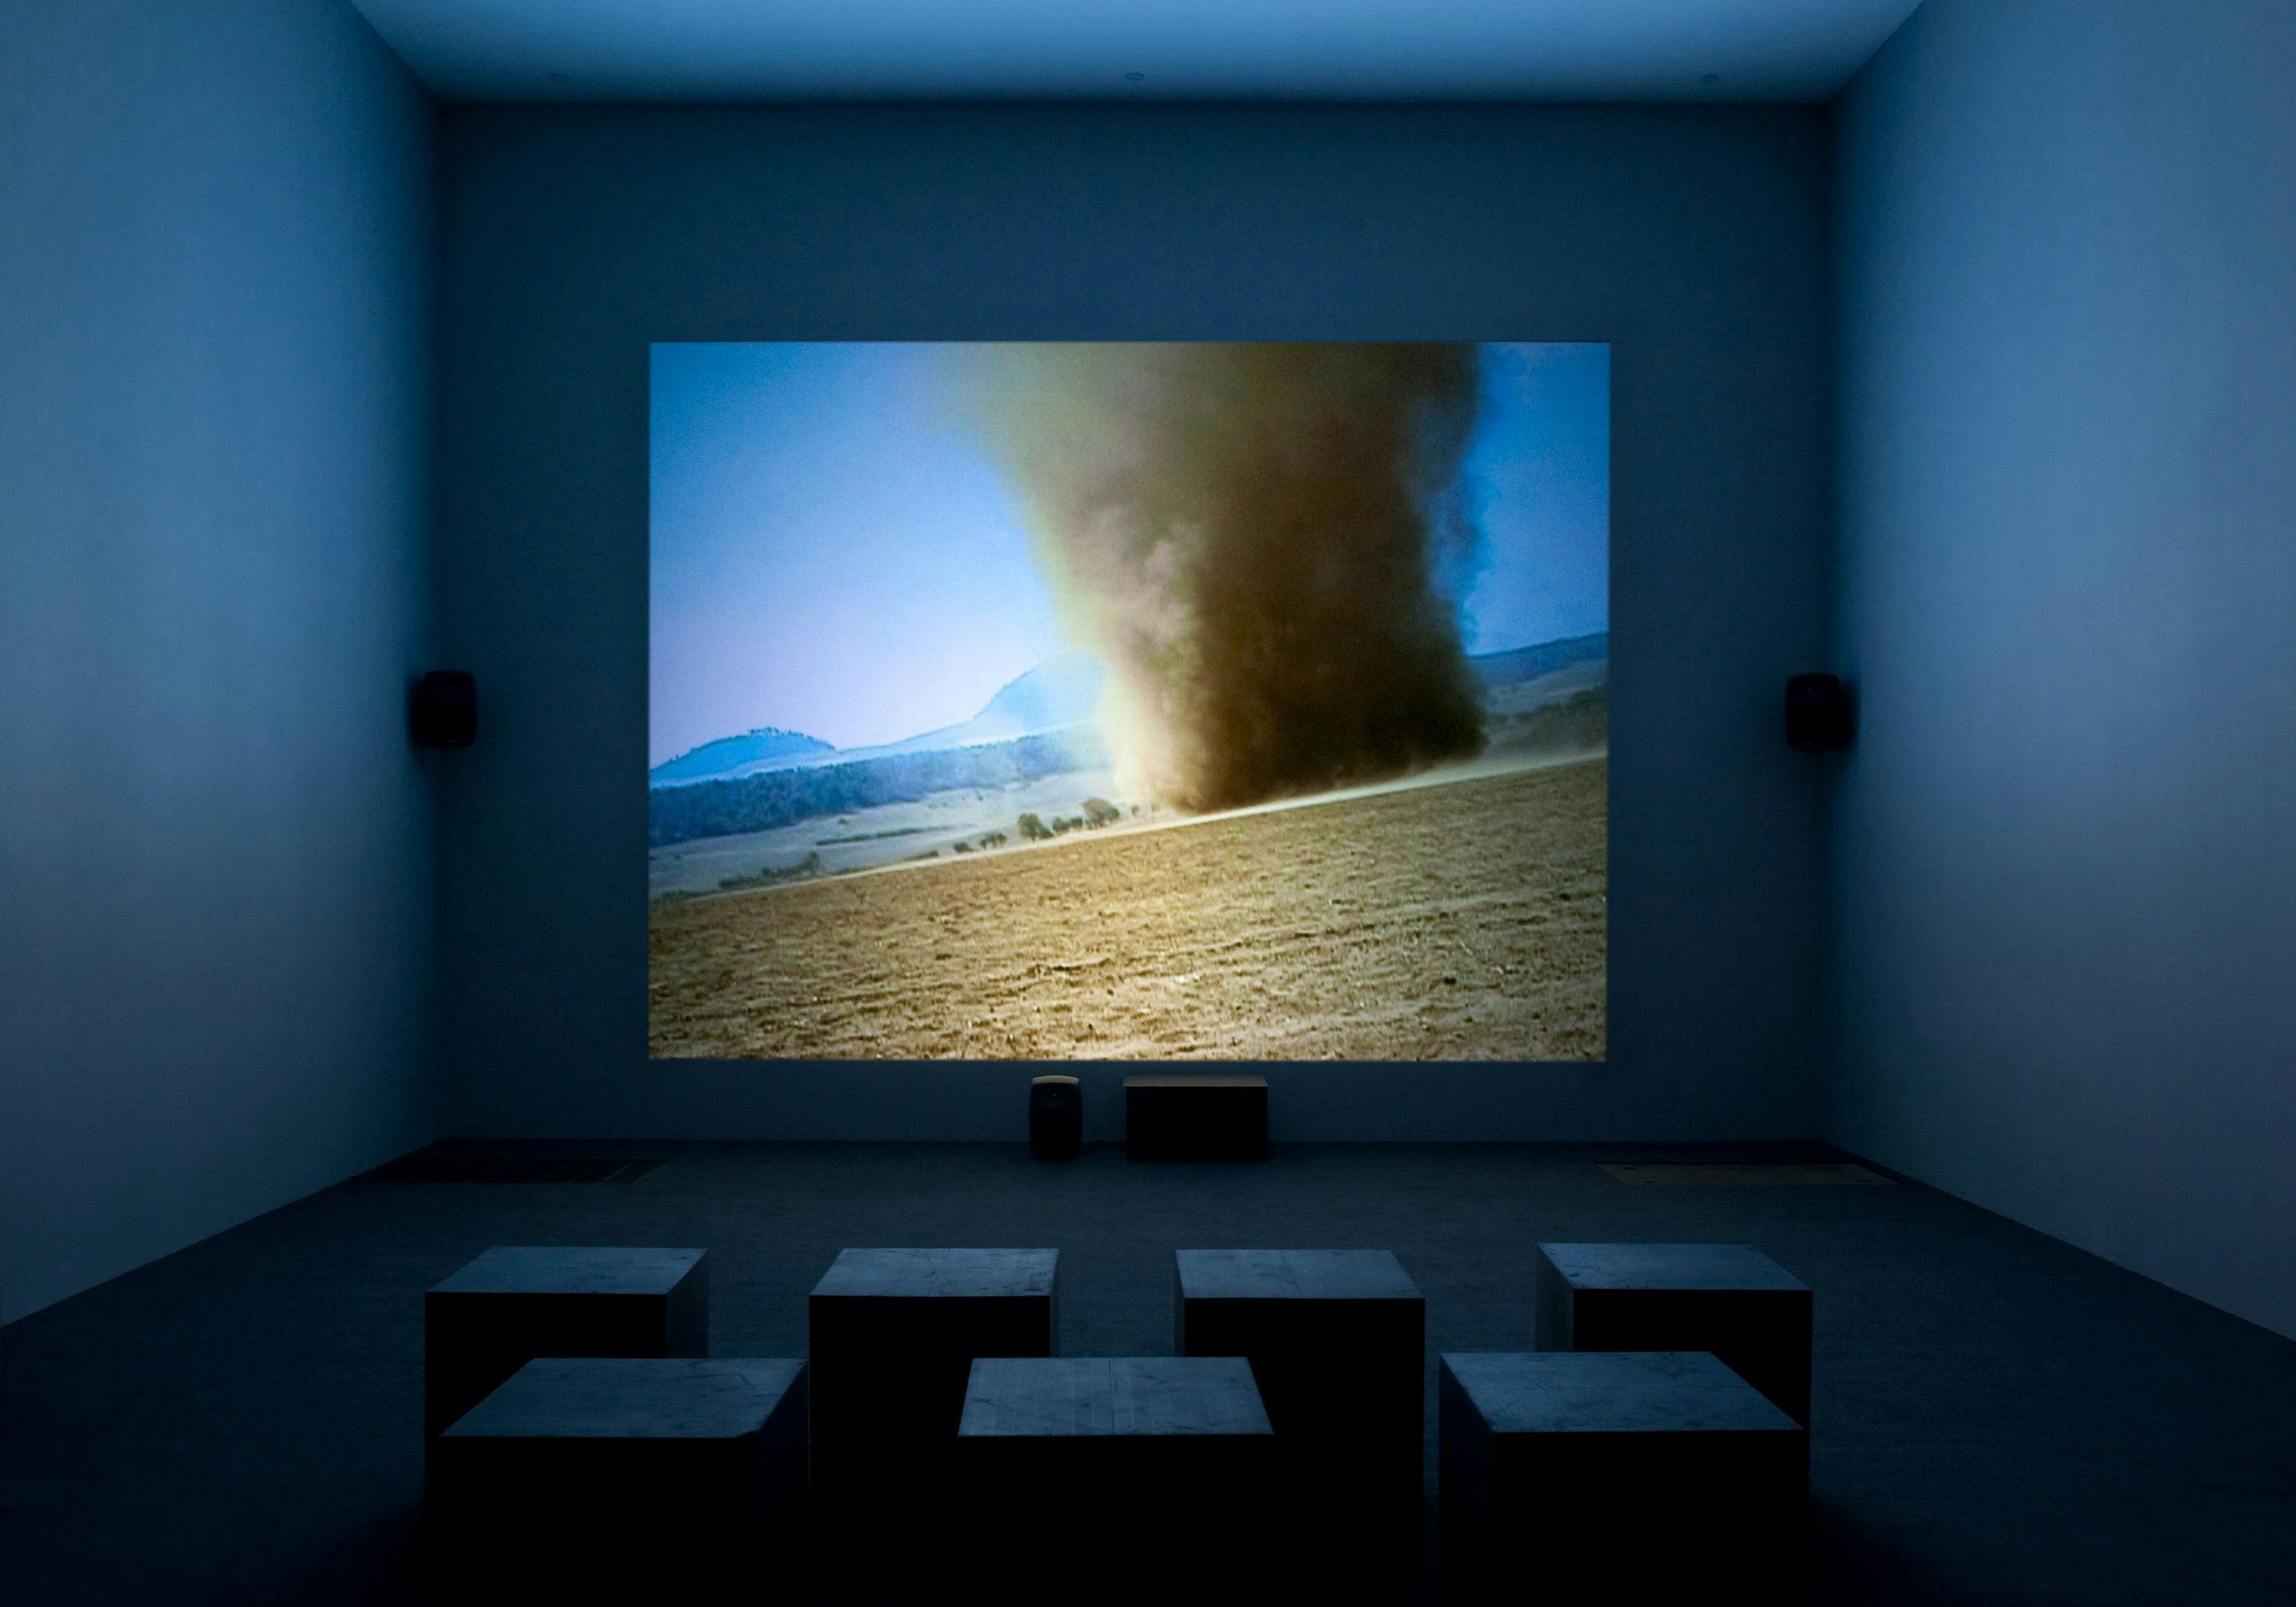 Installation view, Francis Alÿs: A Story of Deception, the Tate Modern, London, 2000 to 2010.